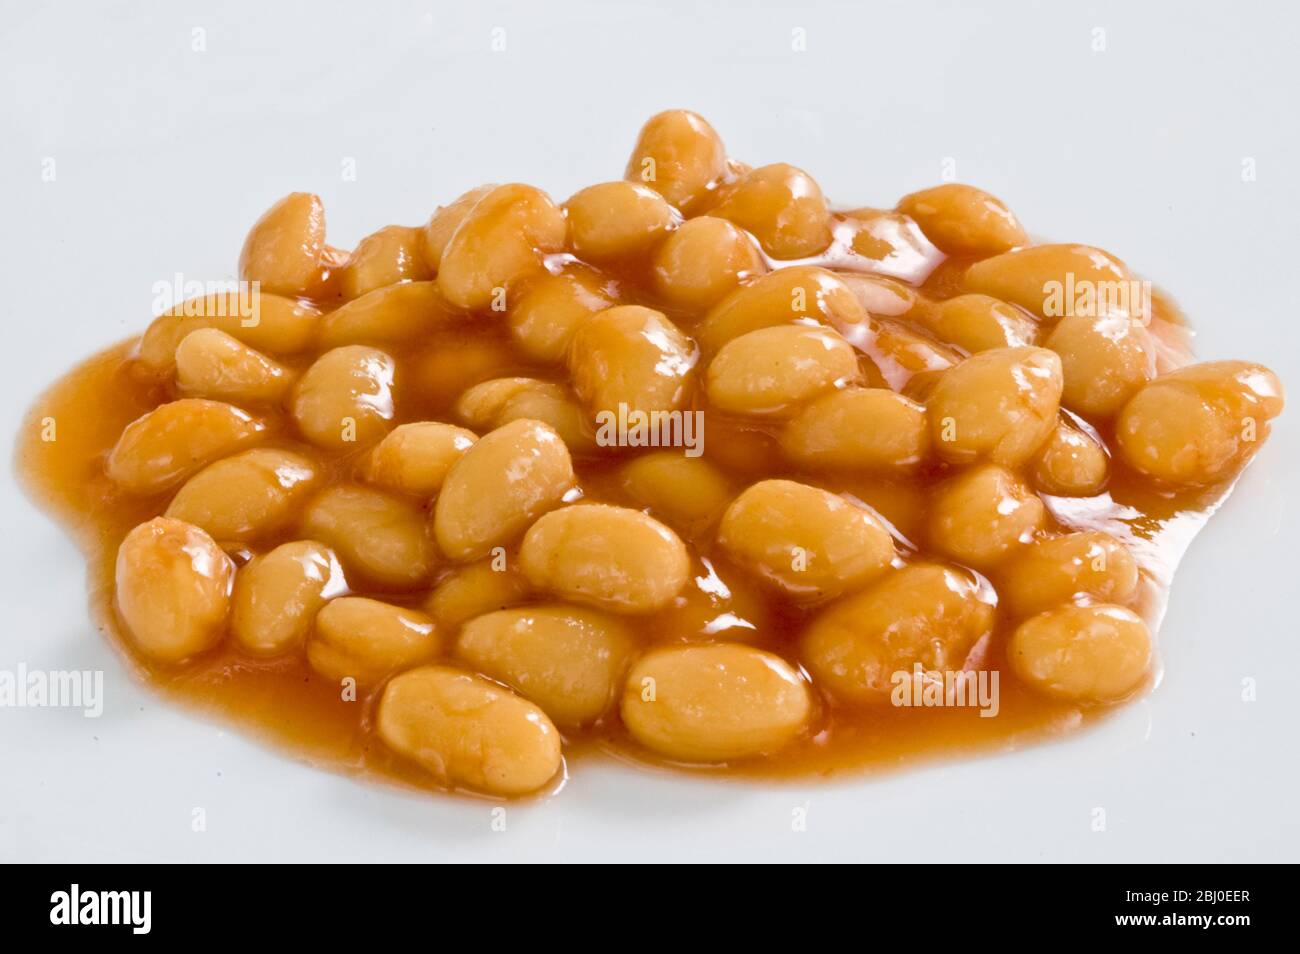 Small heap of baked beans in tomato sauce on white surface - Stock Photo